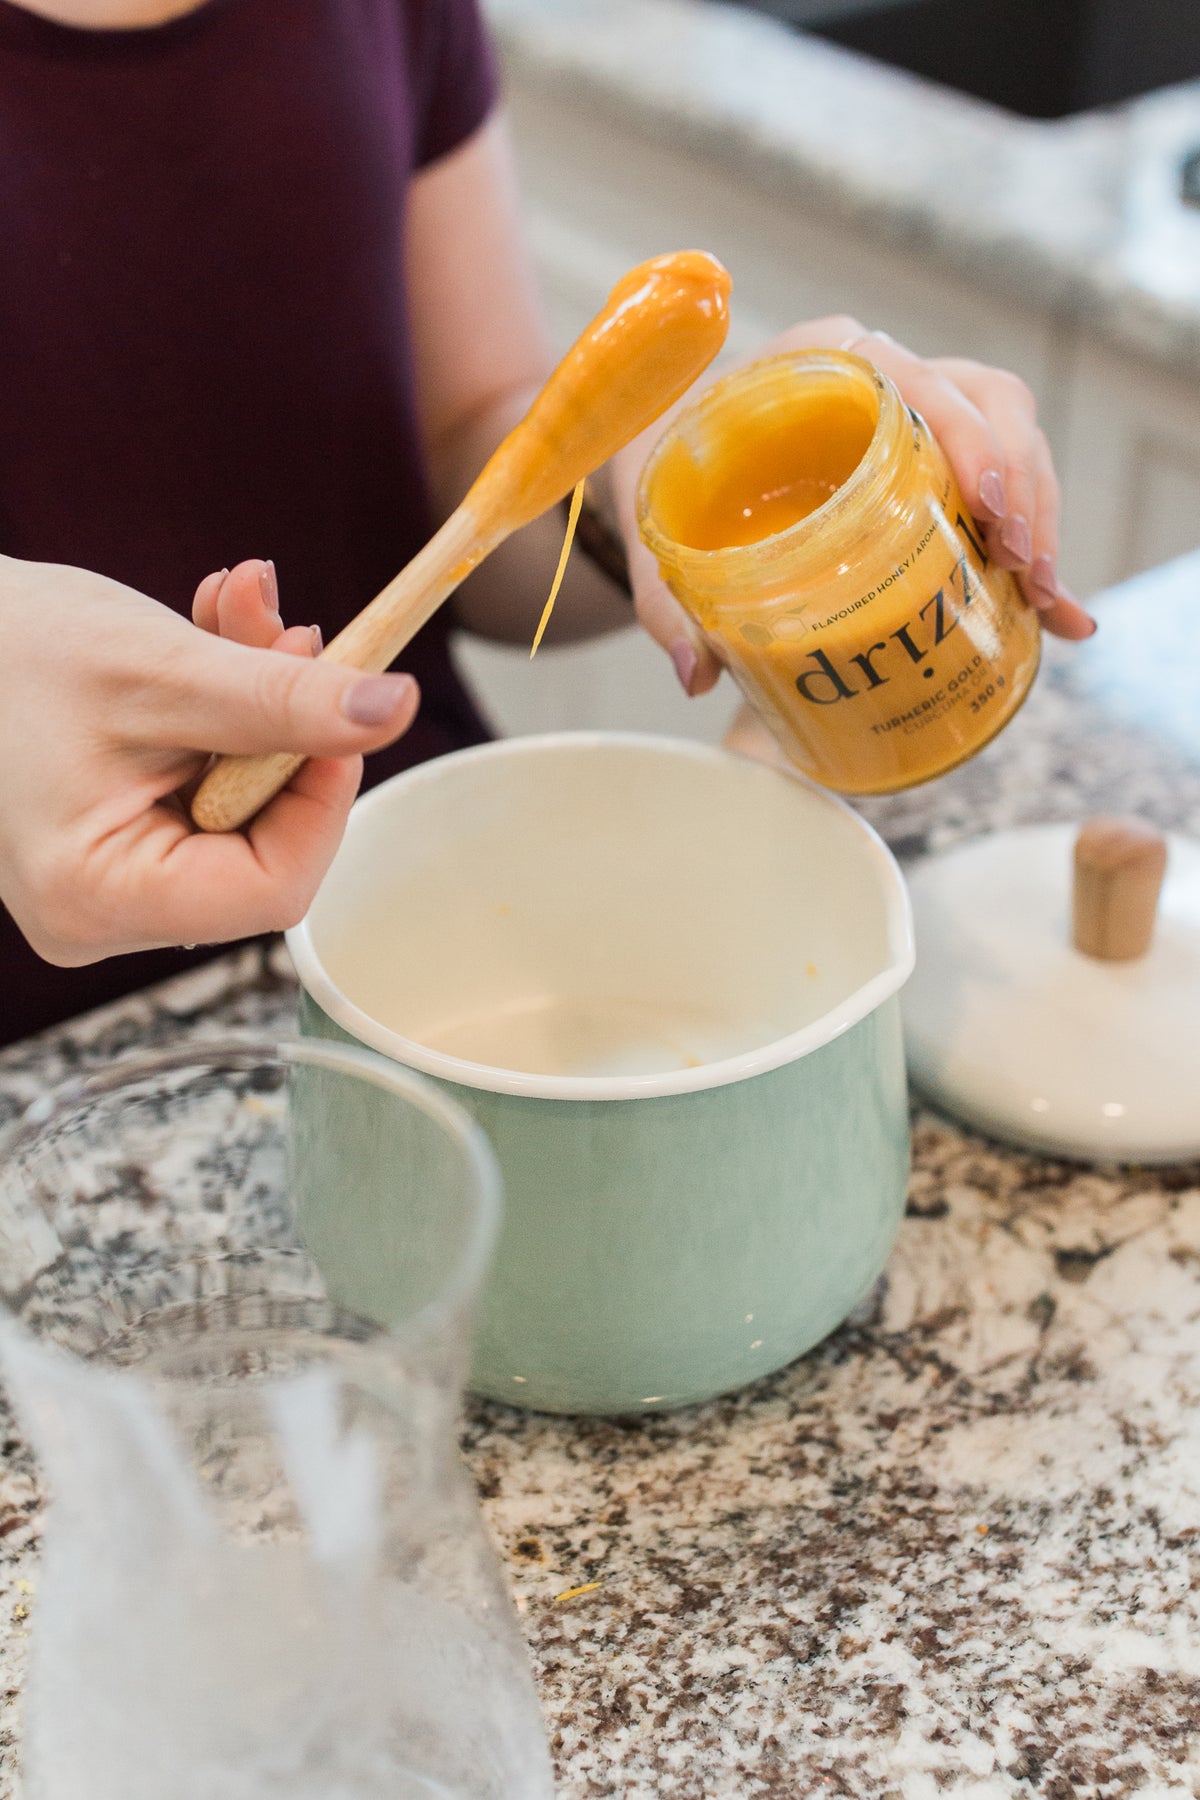 Drizzle Turmeric Gold Raw Honey being used to bake a cake.